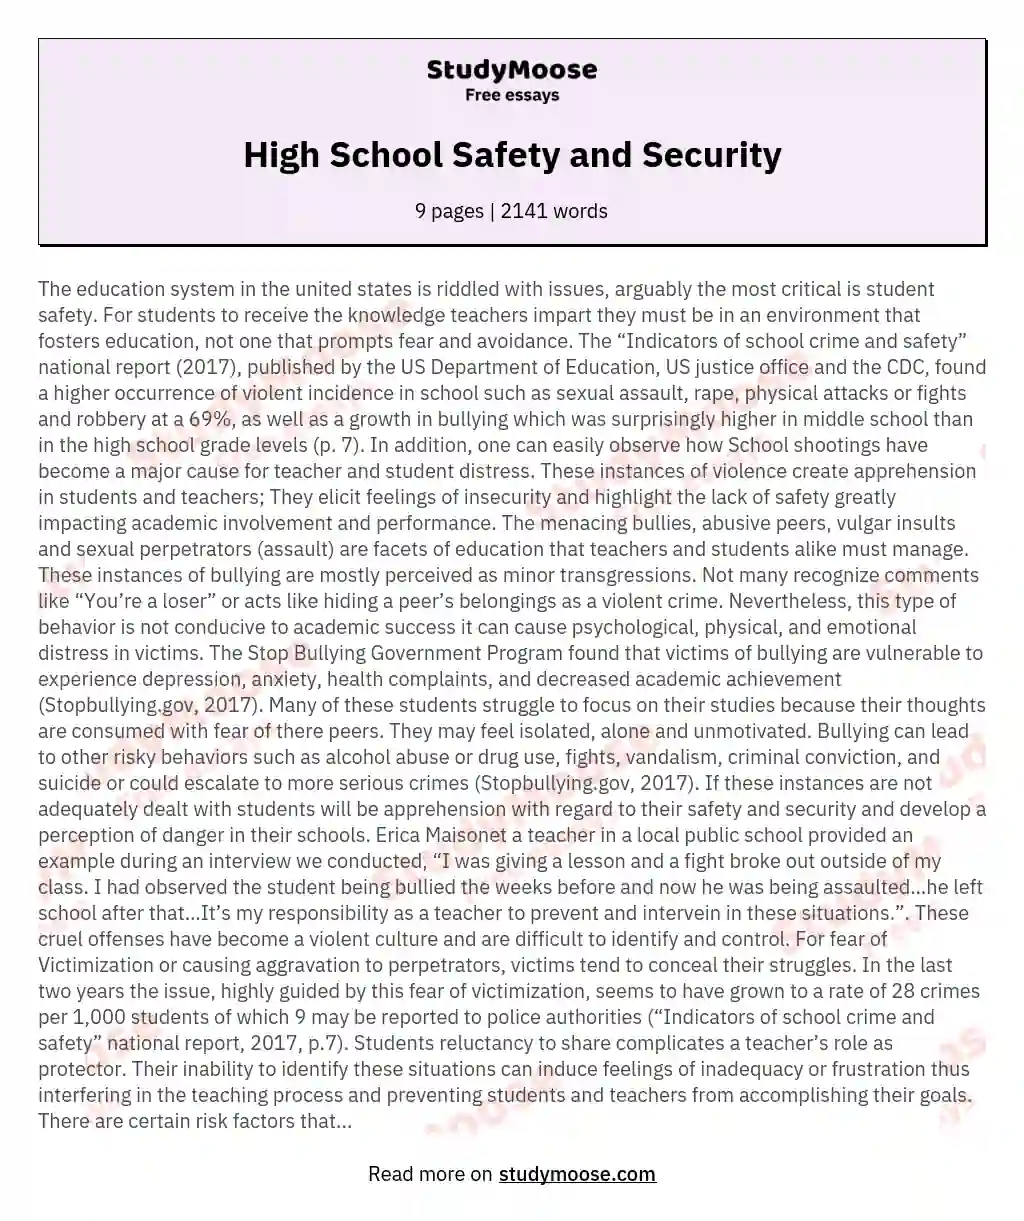 High School Safety and Security essay